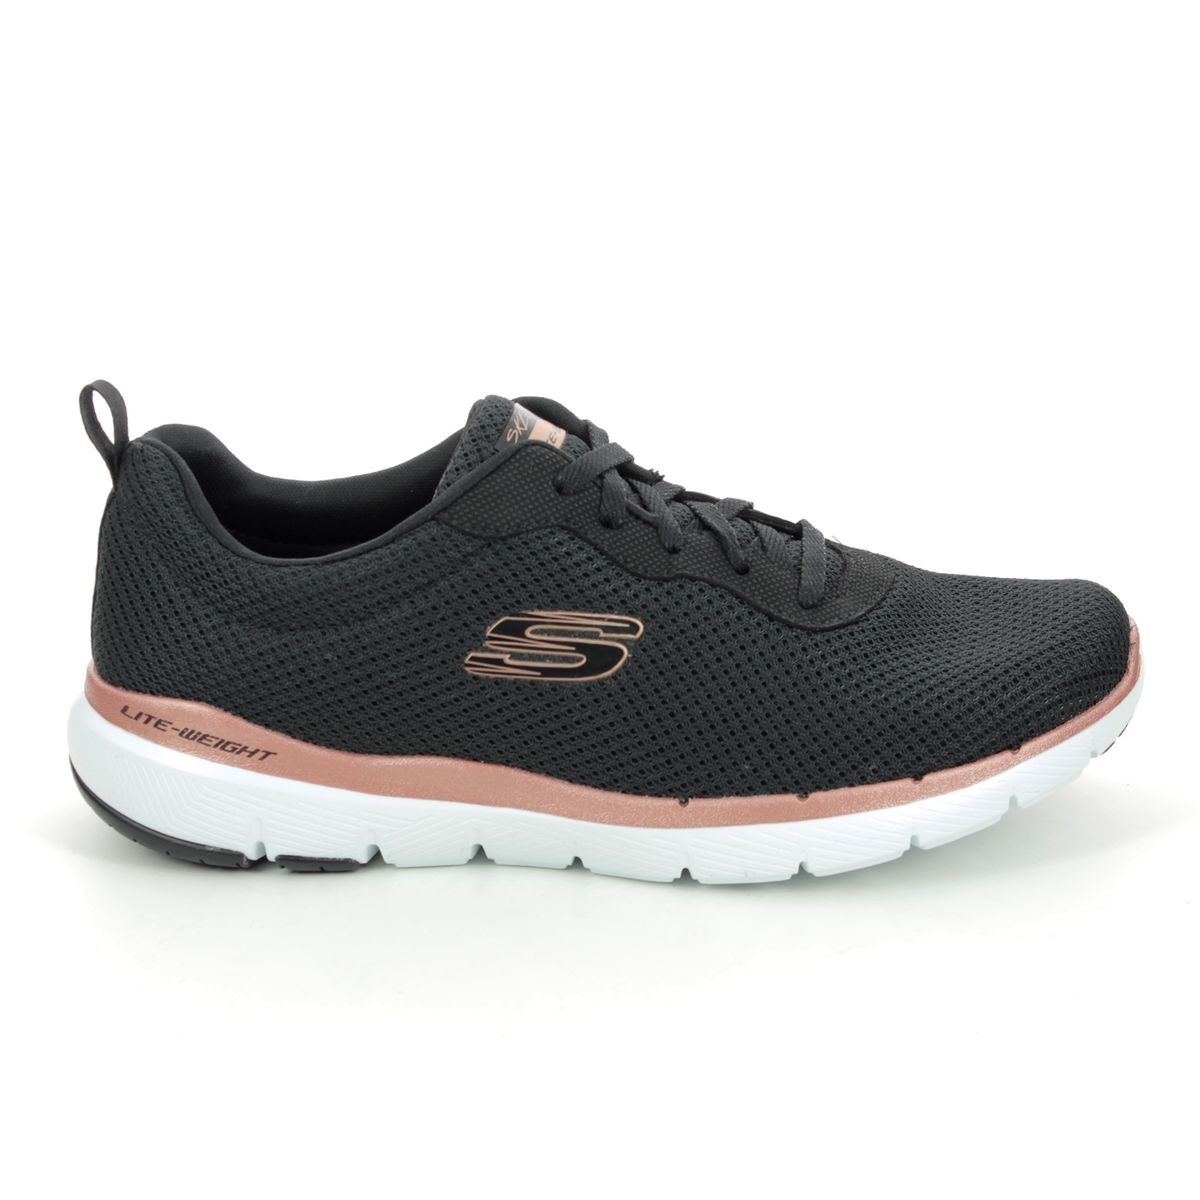 Skechers First Insight 13070 BKRG Black Rose Gold trainers